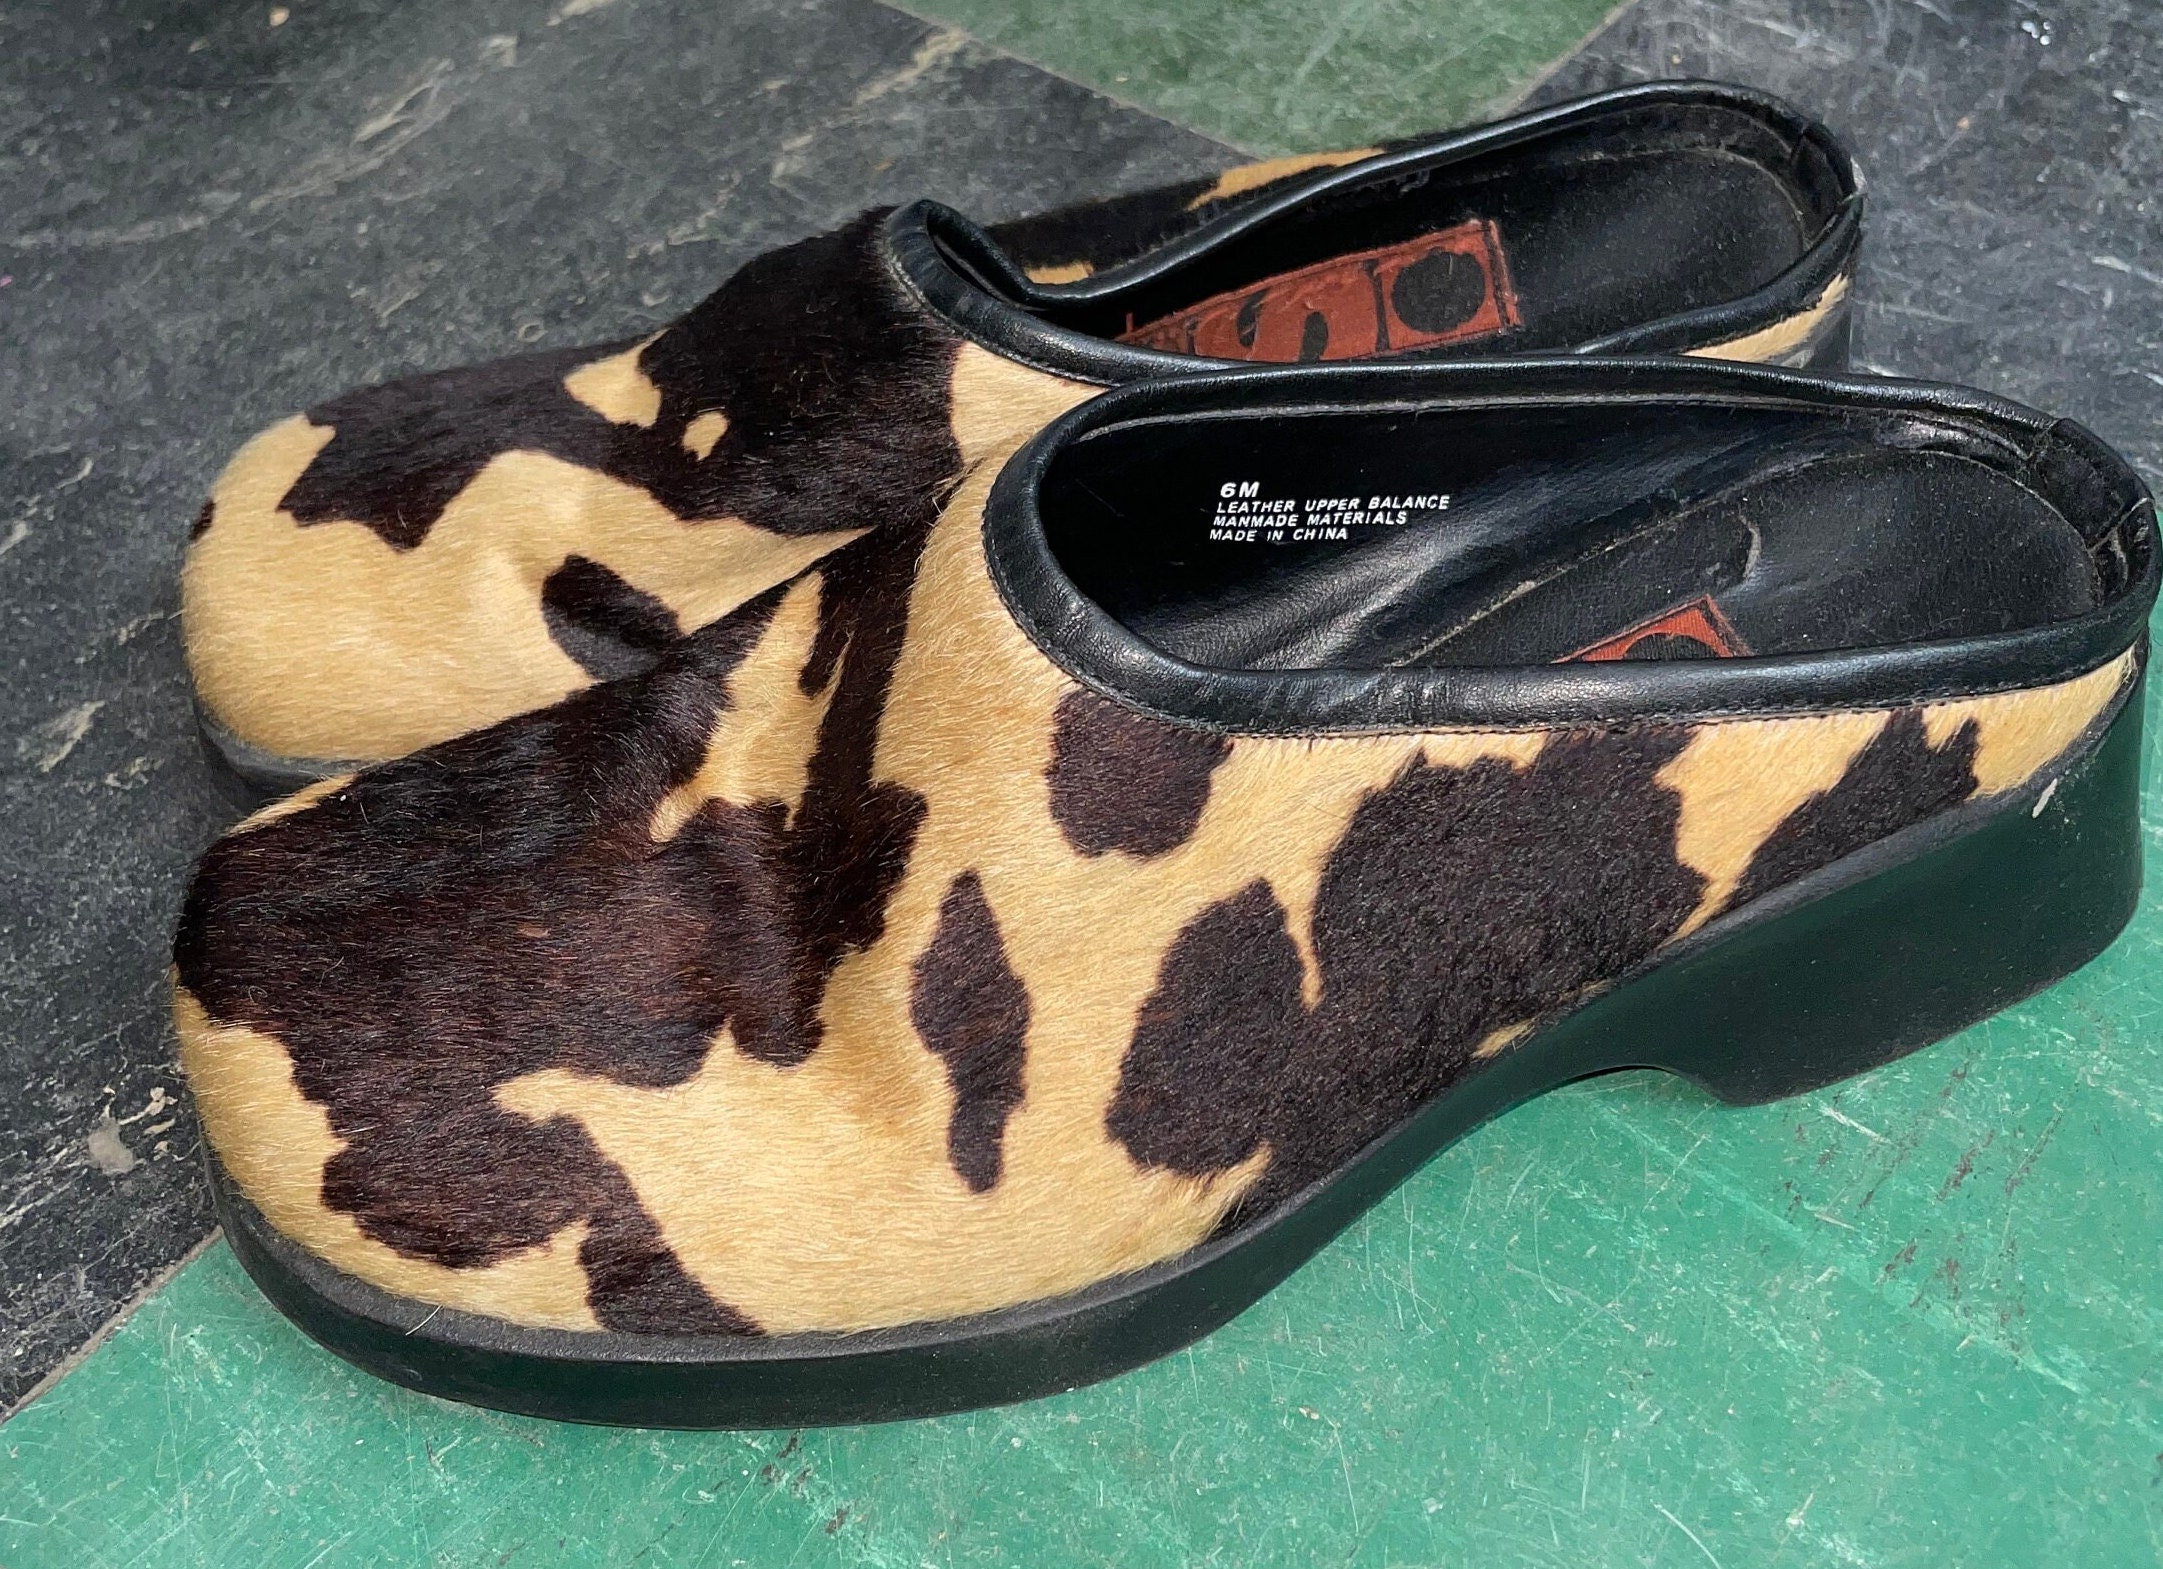 Vintage 80s 90s Cow Print Clogs / OS Inspired Soles by Arteffects / Pony  Hide Fur Boots / Chunky 90s Platform Shoes - Etsy